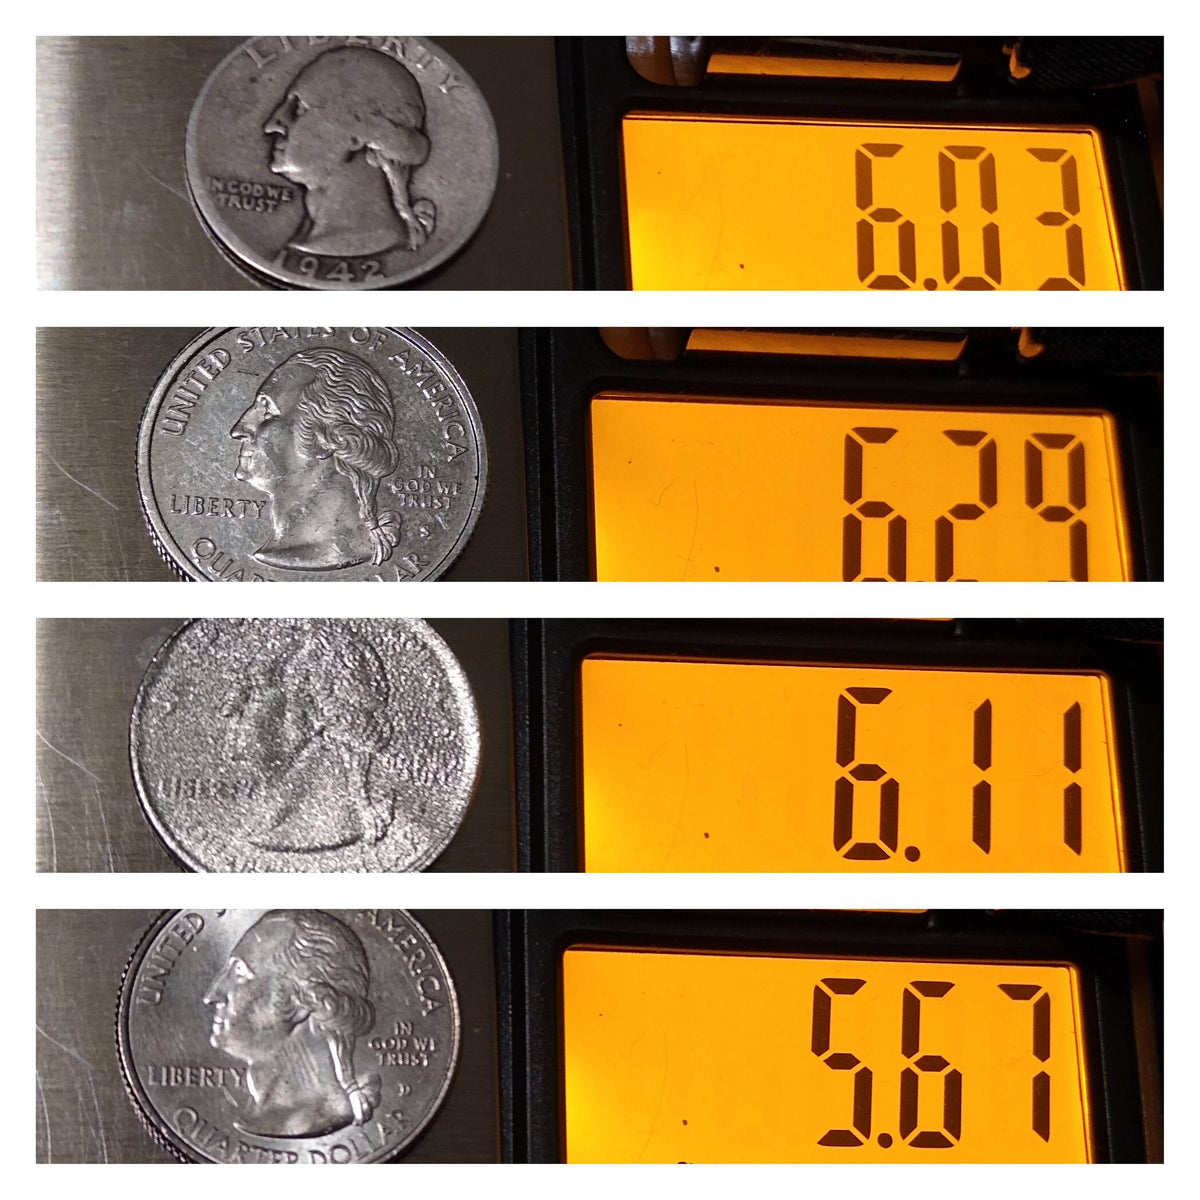 HOW MUCH DO QUARTERS WEIGH?